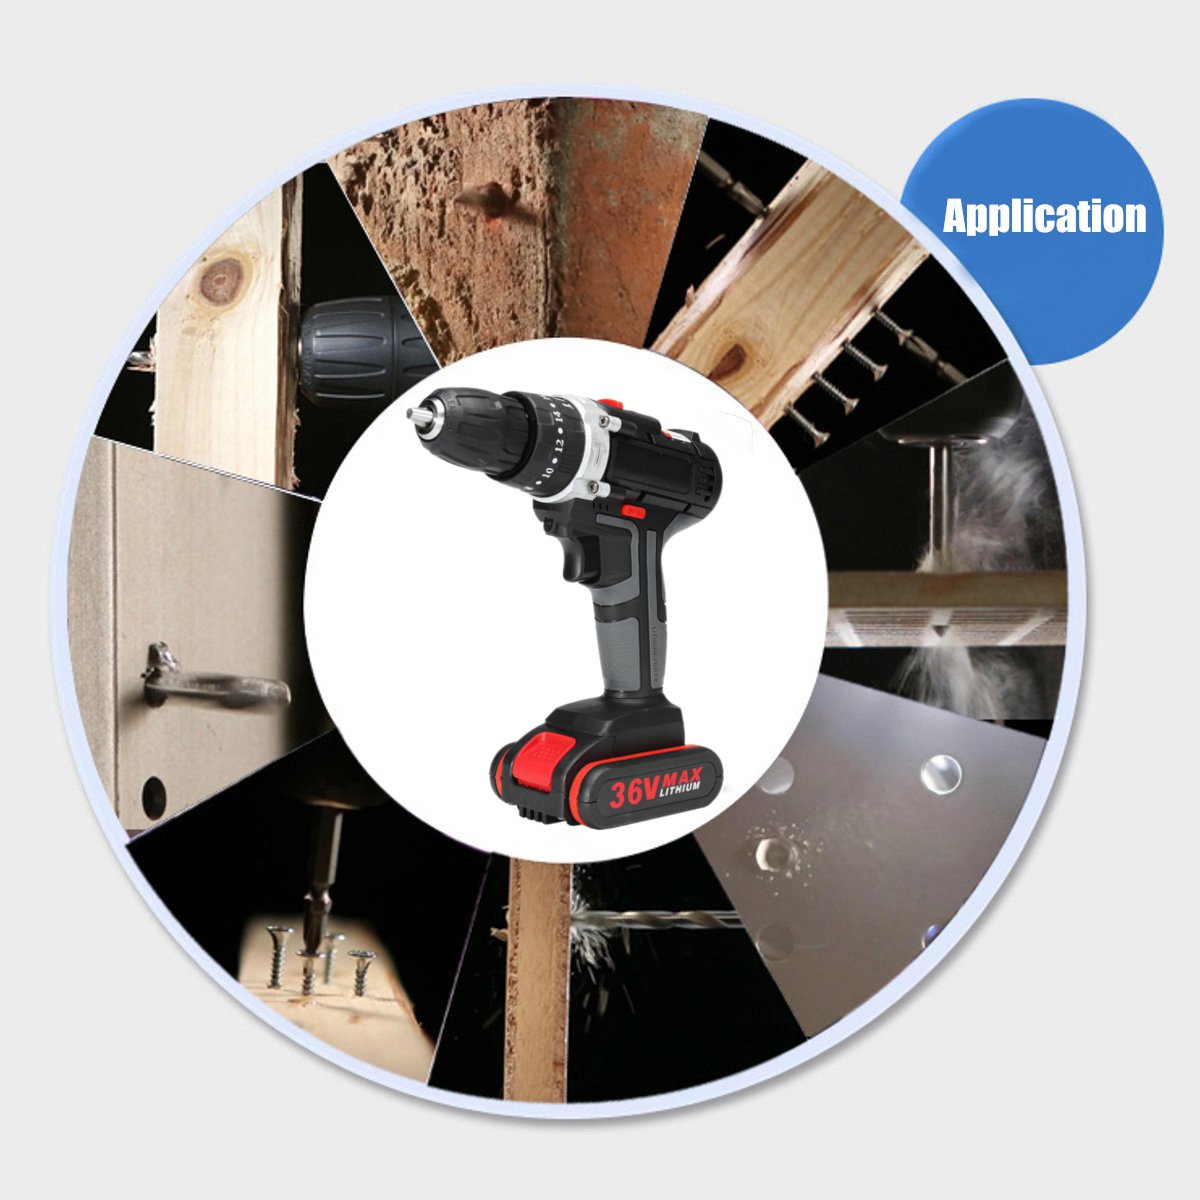 36V-Cordless-Lithium-Electric-Drill-Impact-Power-Drills-28Nm-3000mAh-183-Torque-Stage-Drill-Tools-1404353